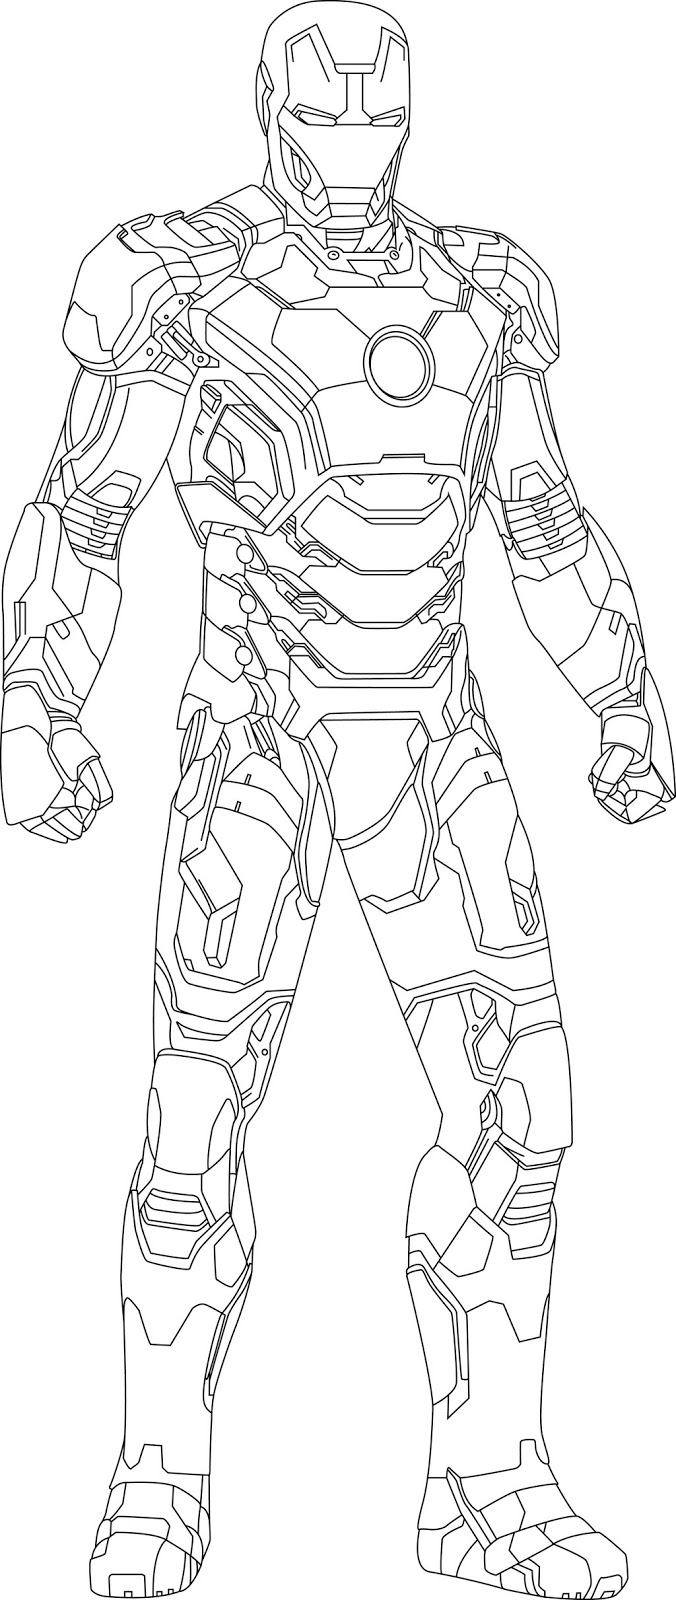 Coloring pages for kids free images: Iron Man Avengers free coloring